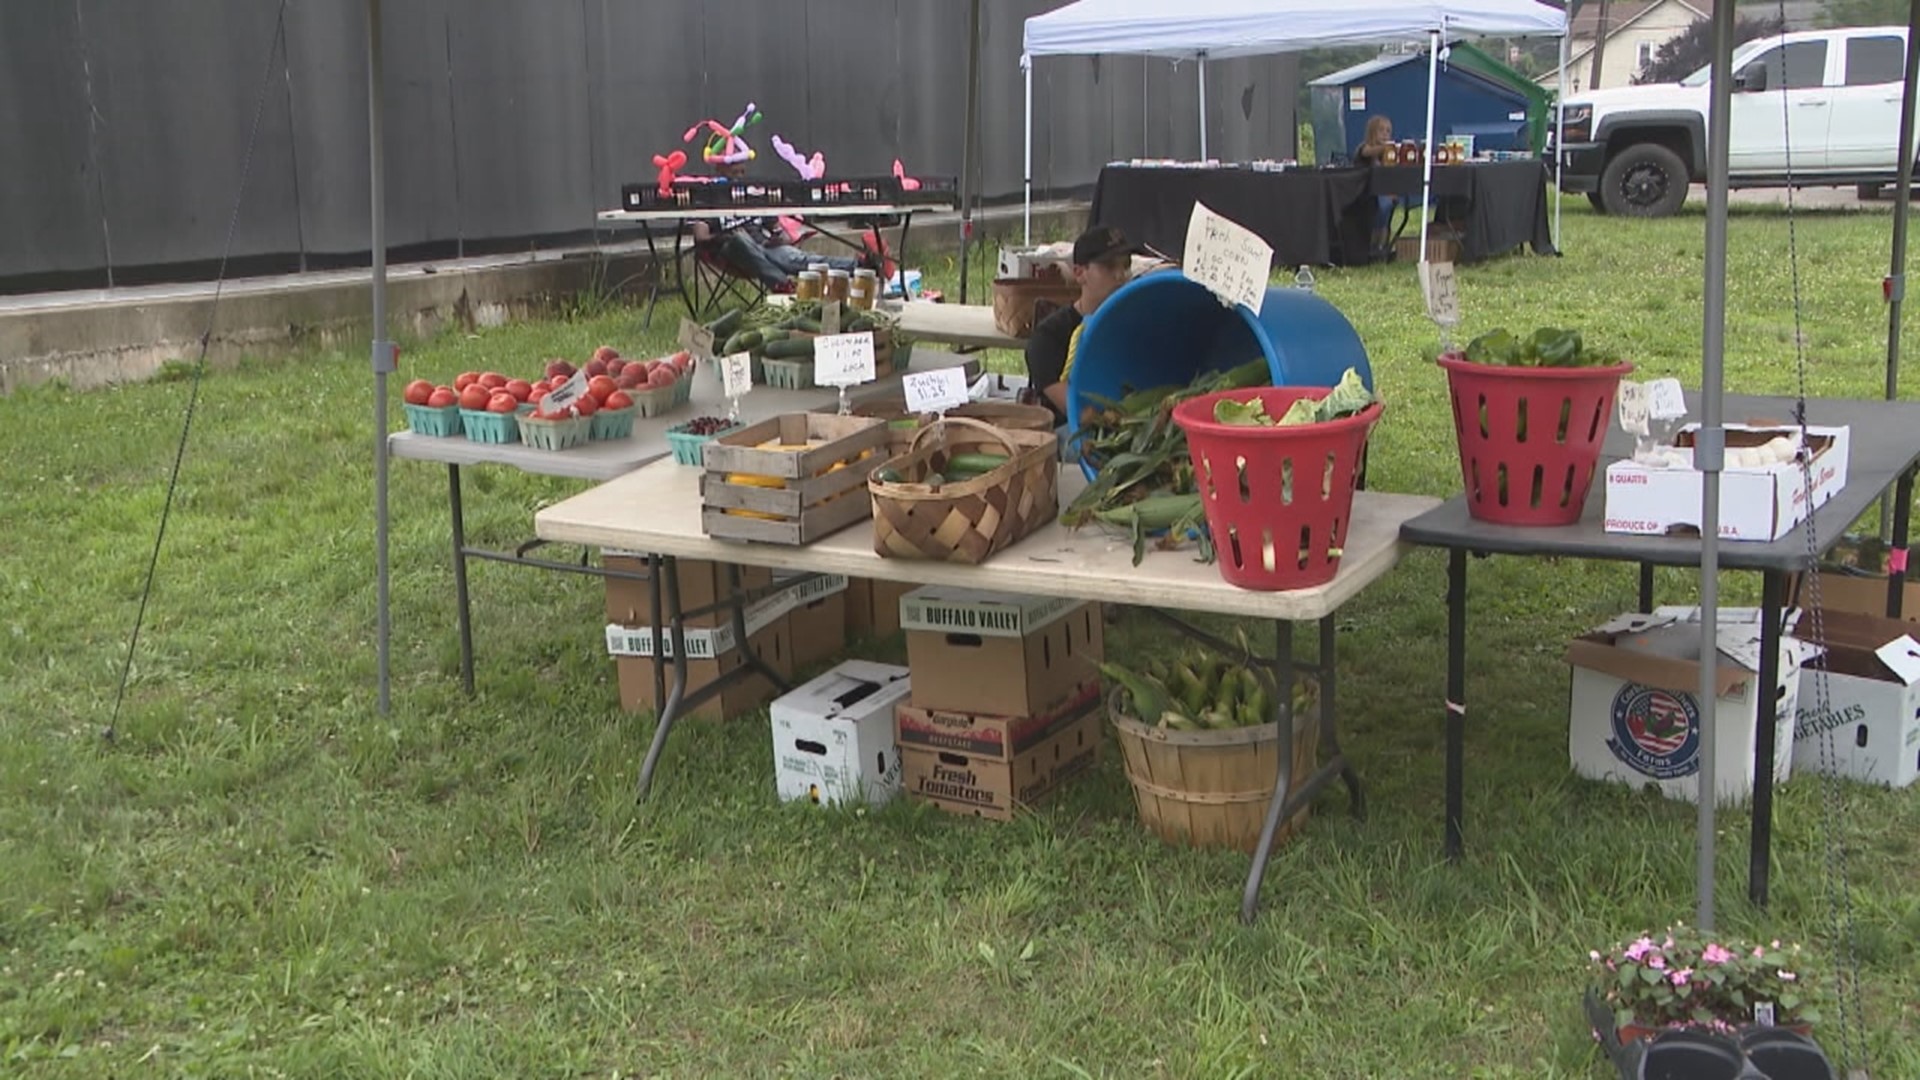 A young woman is working to connect her neighbors with fresh food after her community lost its local grocery store.